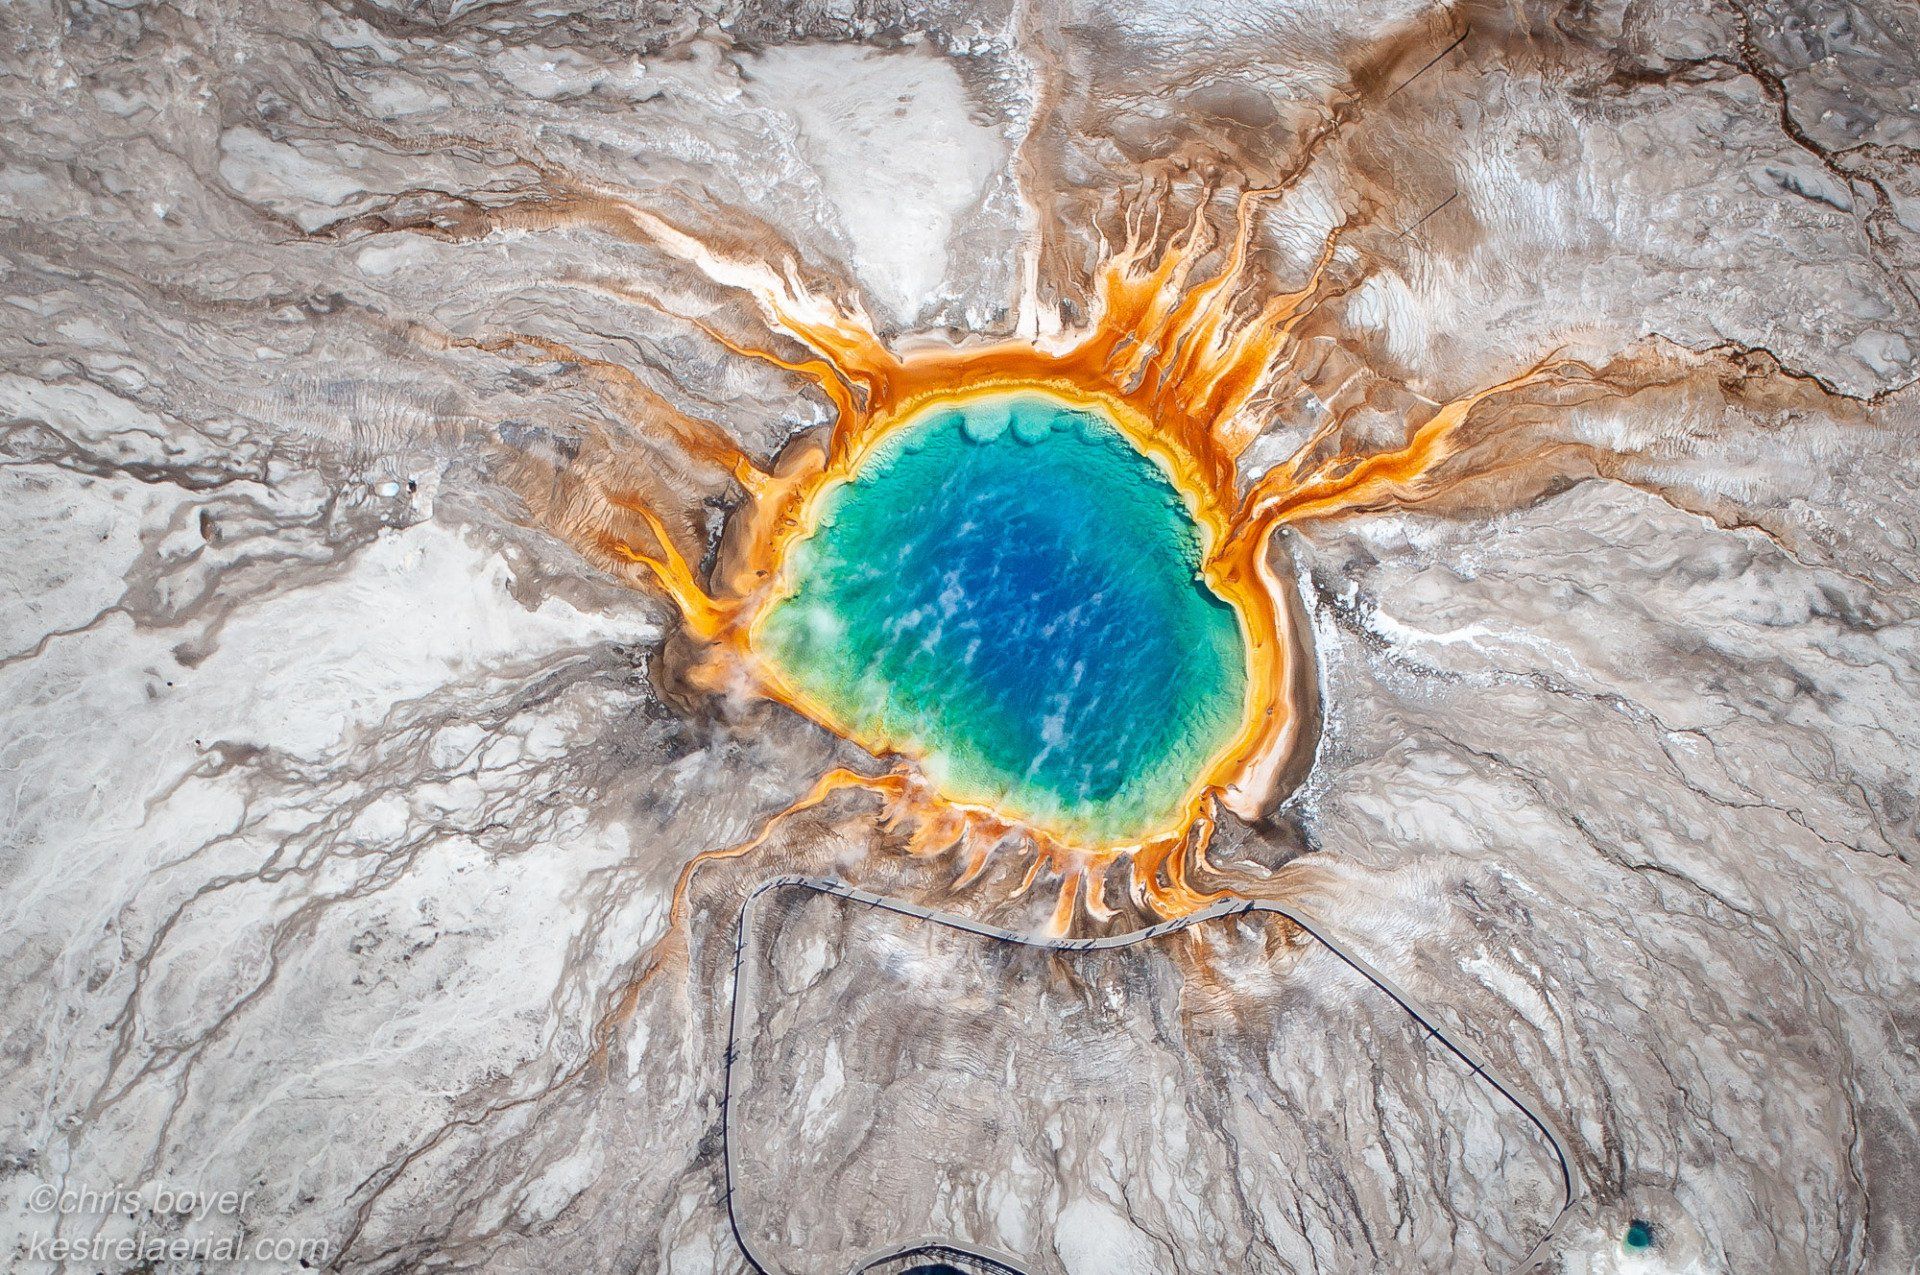 Grand Prismatic Spring #1, Yellowstone National Park, Wyoming